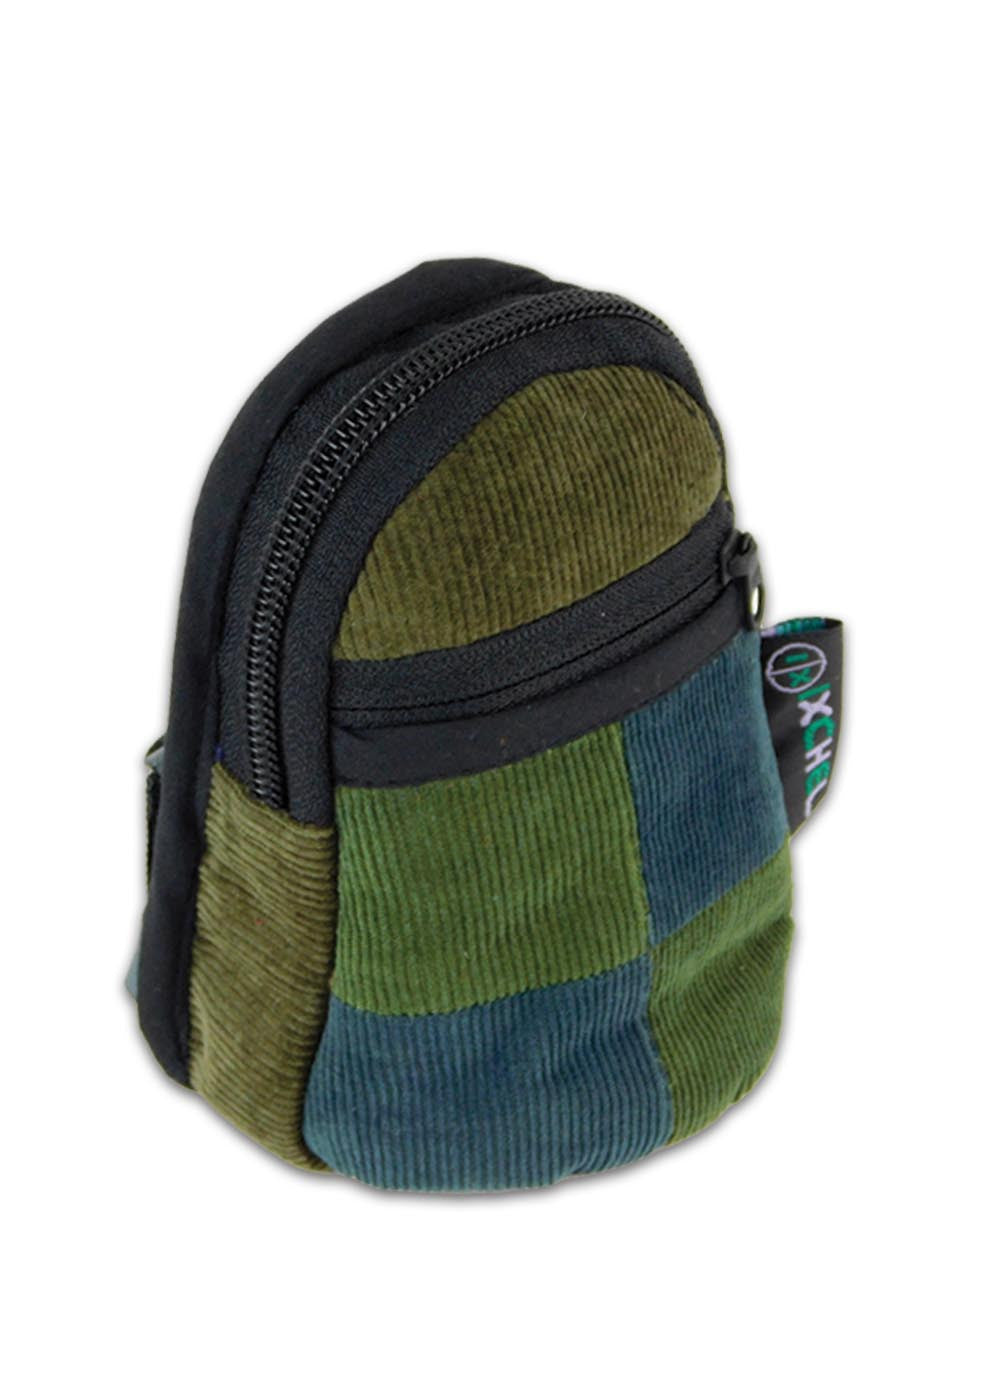 Patchwork Micro Backpack in corduroy- large